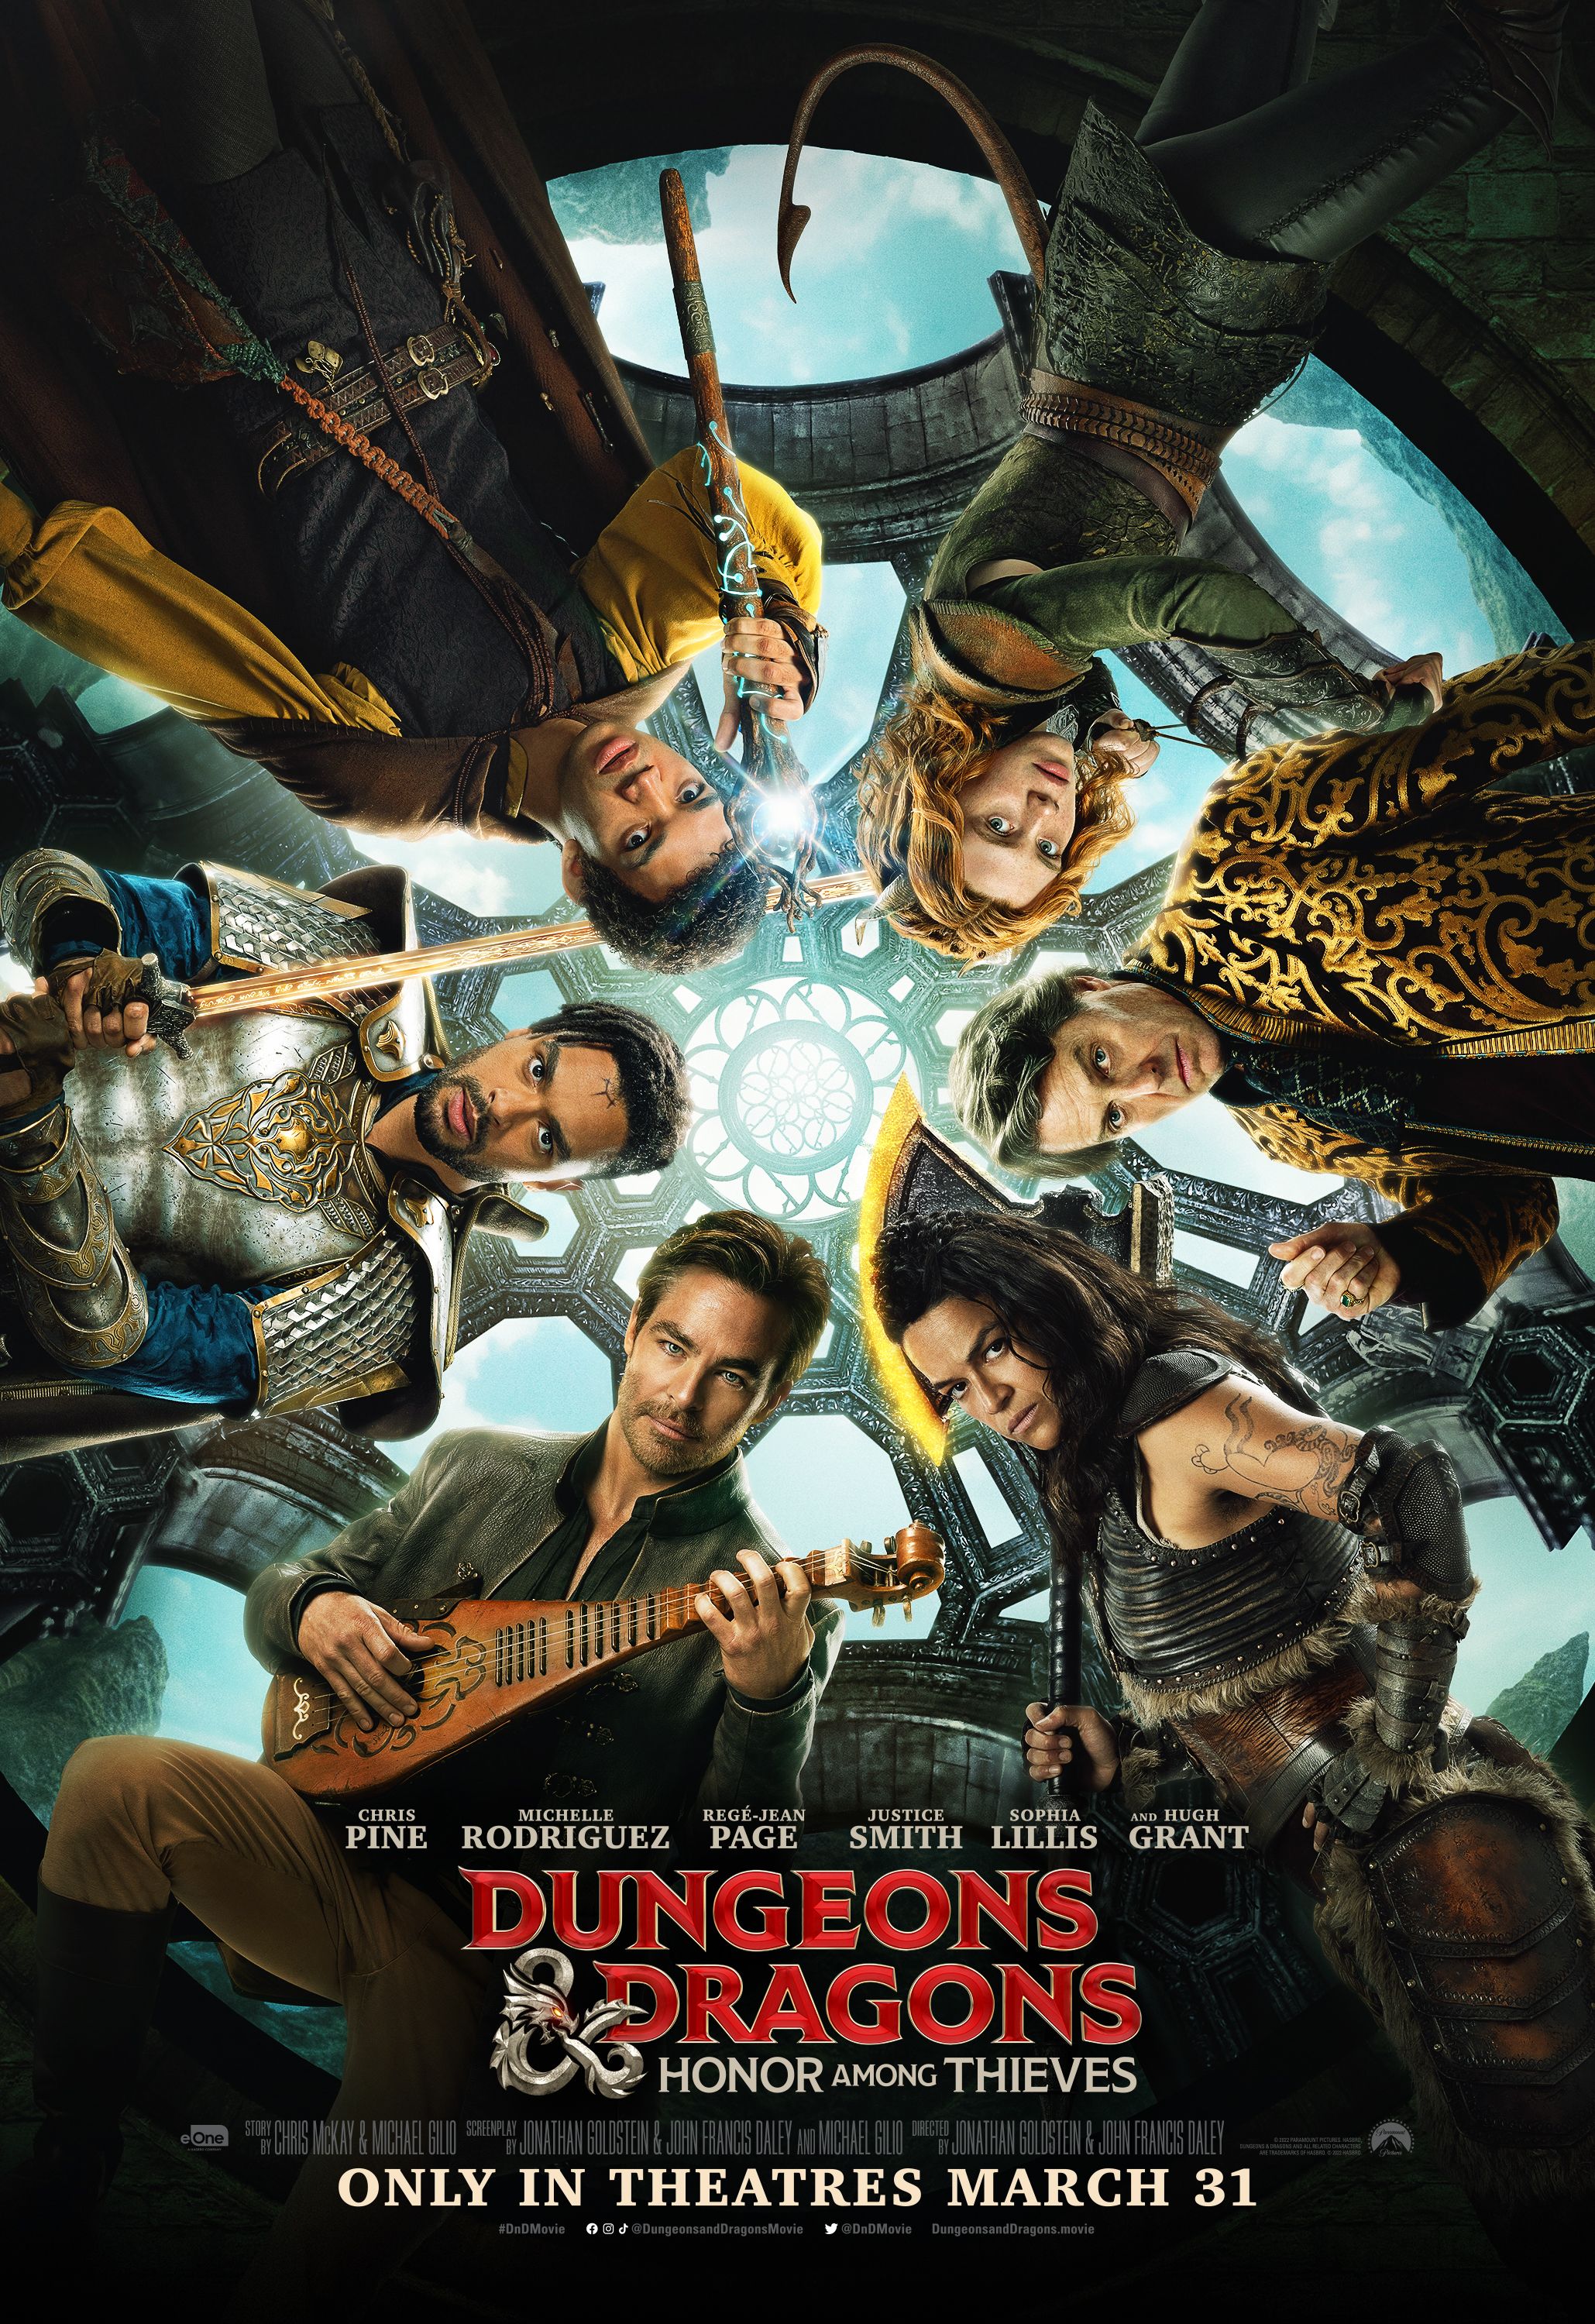  Hugh Grant, Michelle Rodriguez, Chris Pine, Daisy Head, Regé-Jean Page, Sophia Lillis, and Justice Smith in Dungeons & Dragons: Honor Among Thieves (2023)